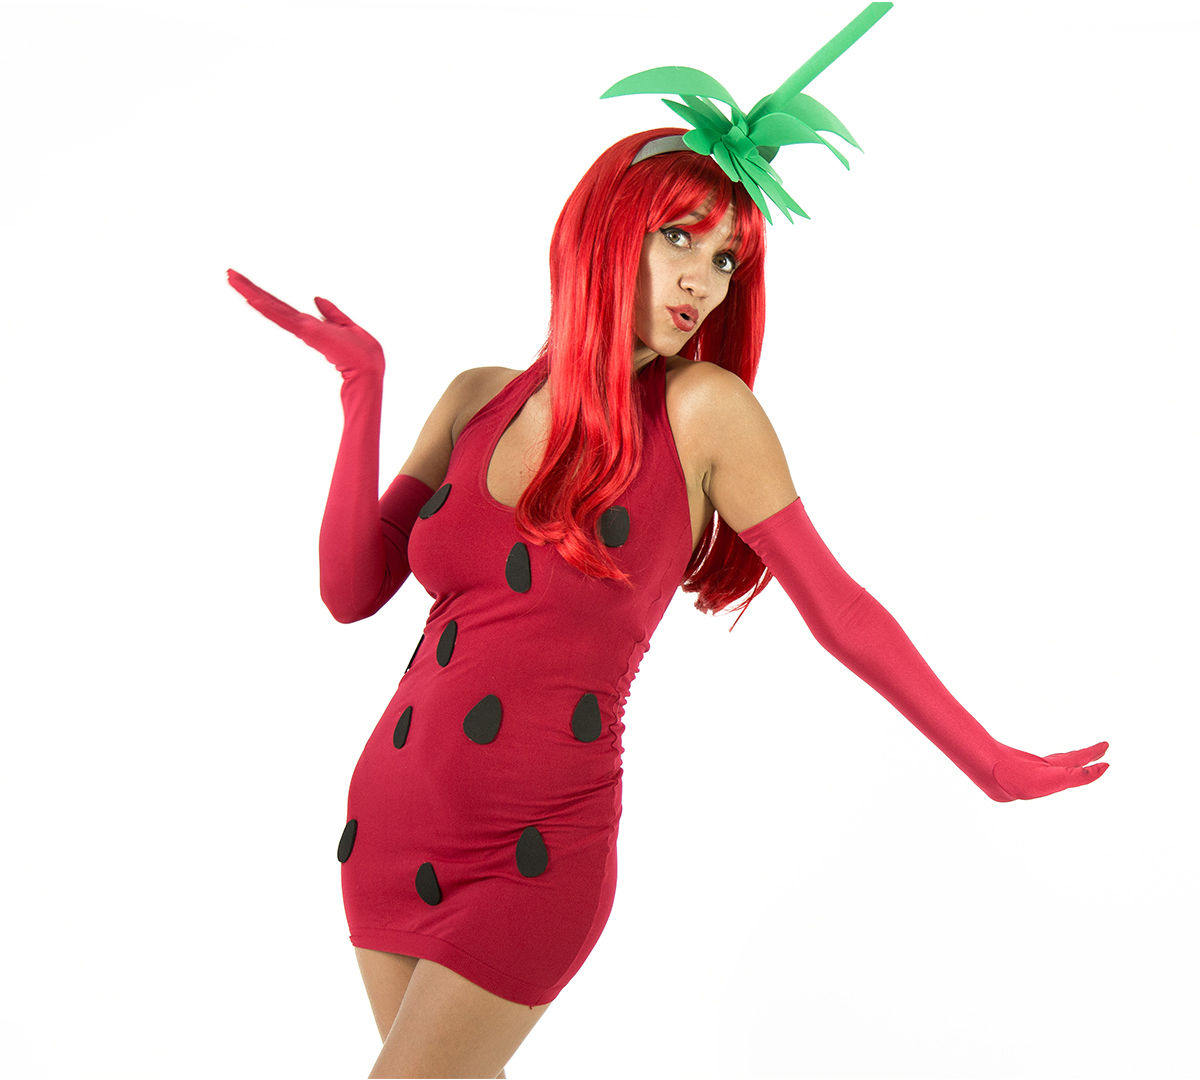 How To Make An Strawberry Costume For Halloween - We Love Colors